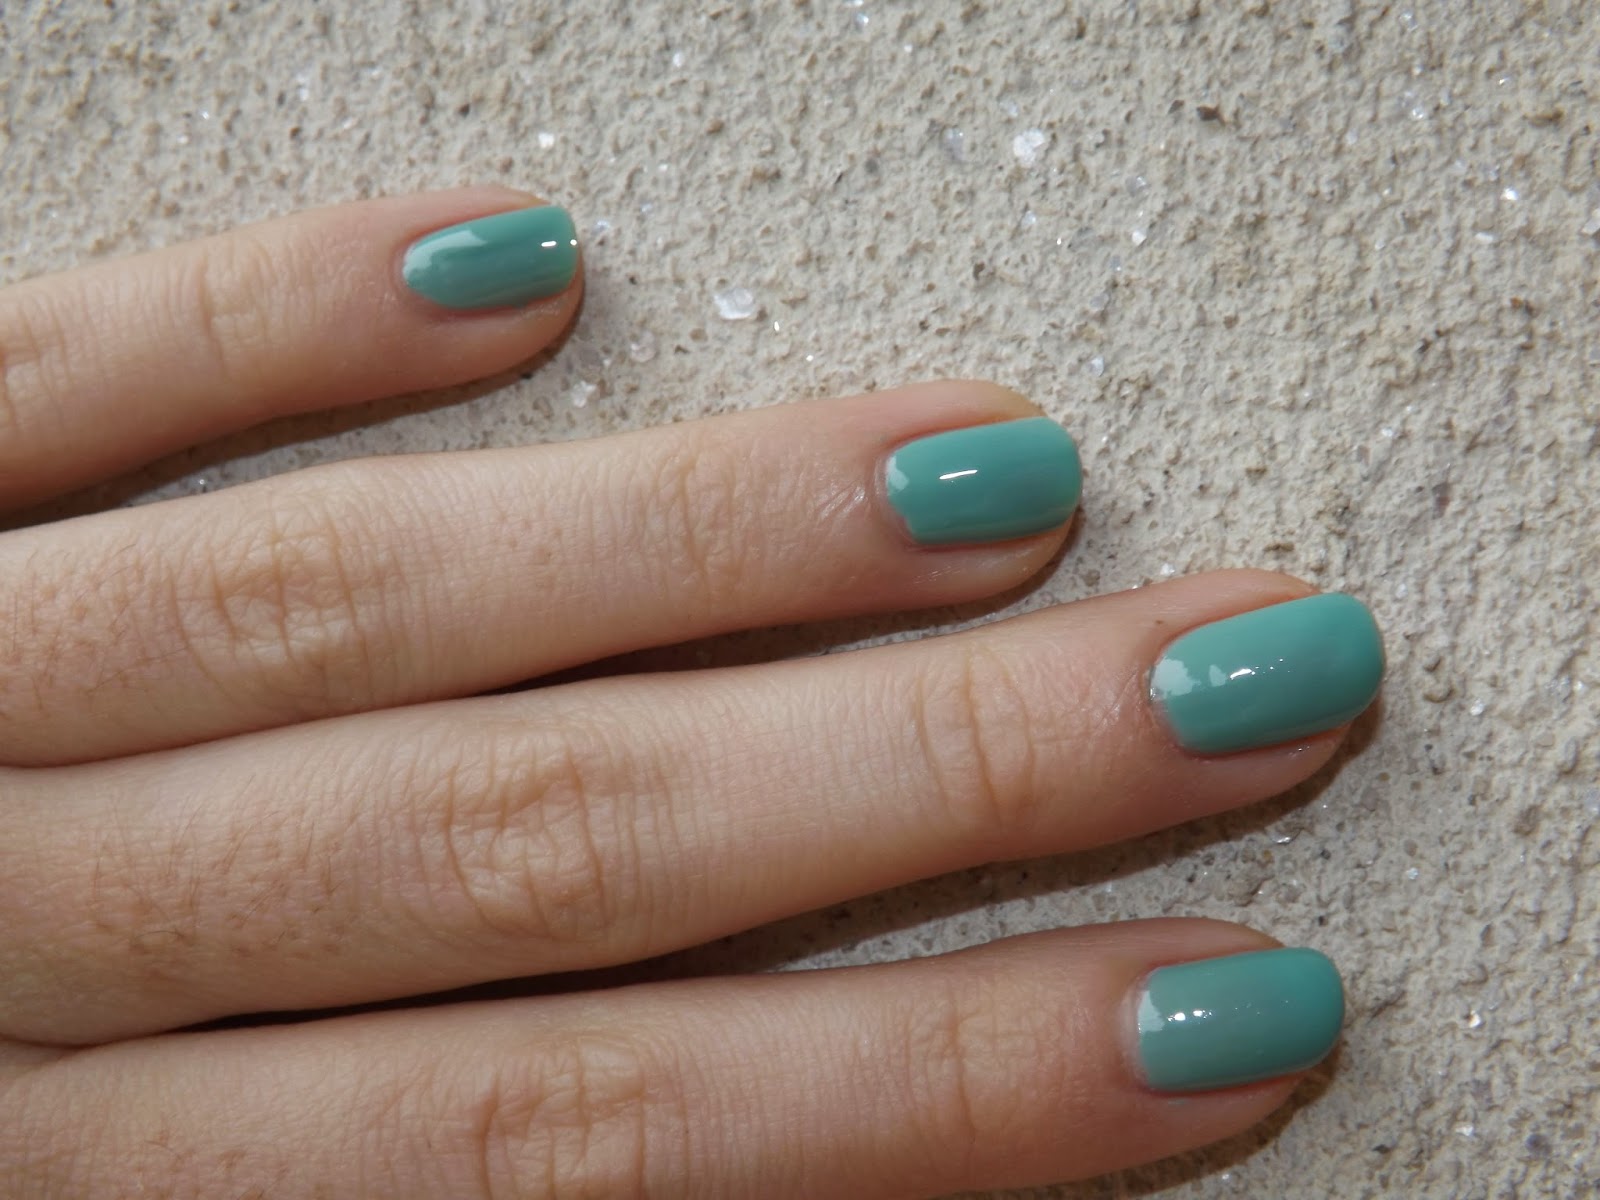 2. Essie Nail Polish in "Turquoise & Caicos" - wide 5